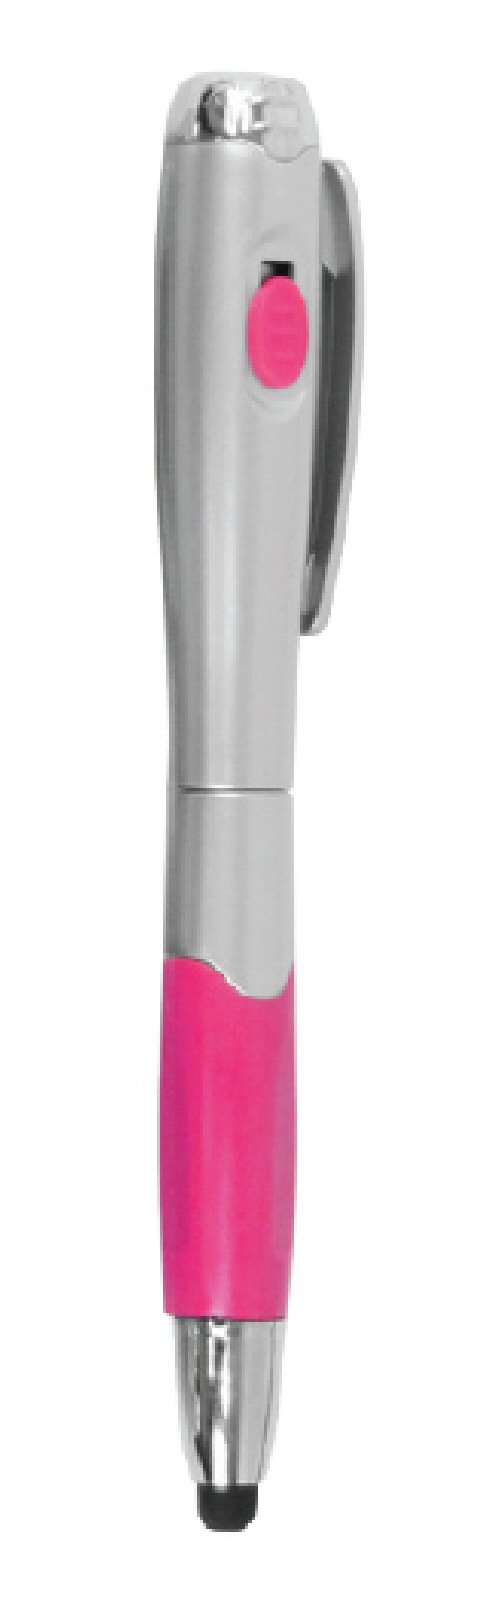 3-Way Tablet Stylus, PINK Pen & LED Light for iPad, Android - Click Image to Close